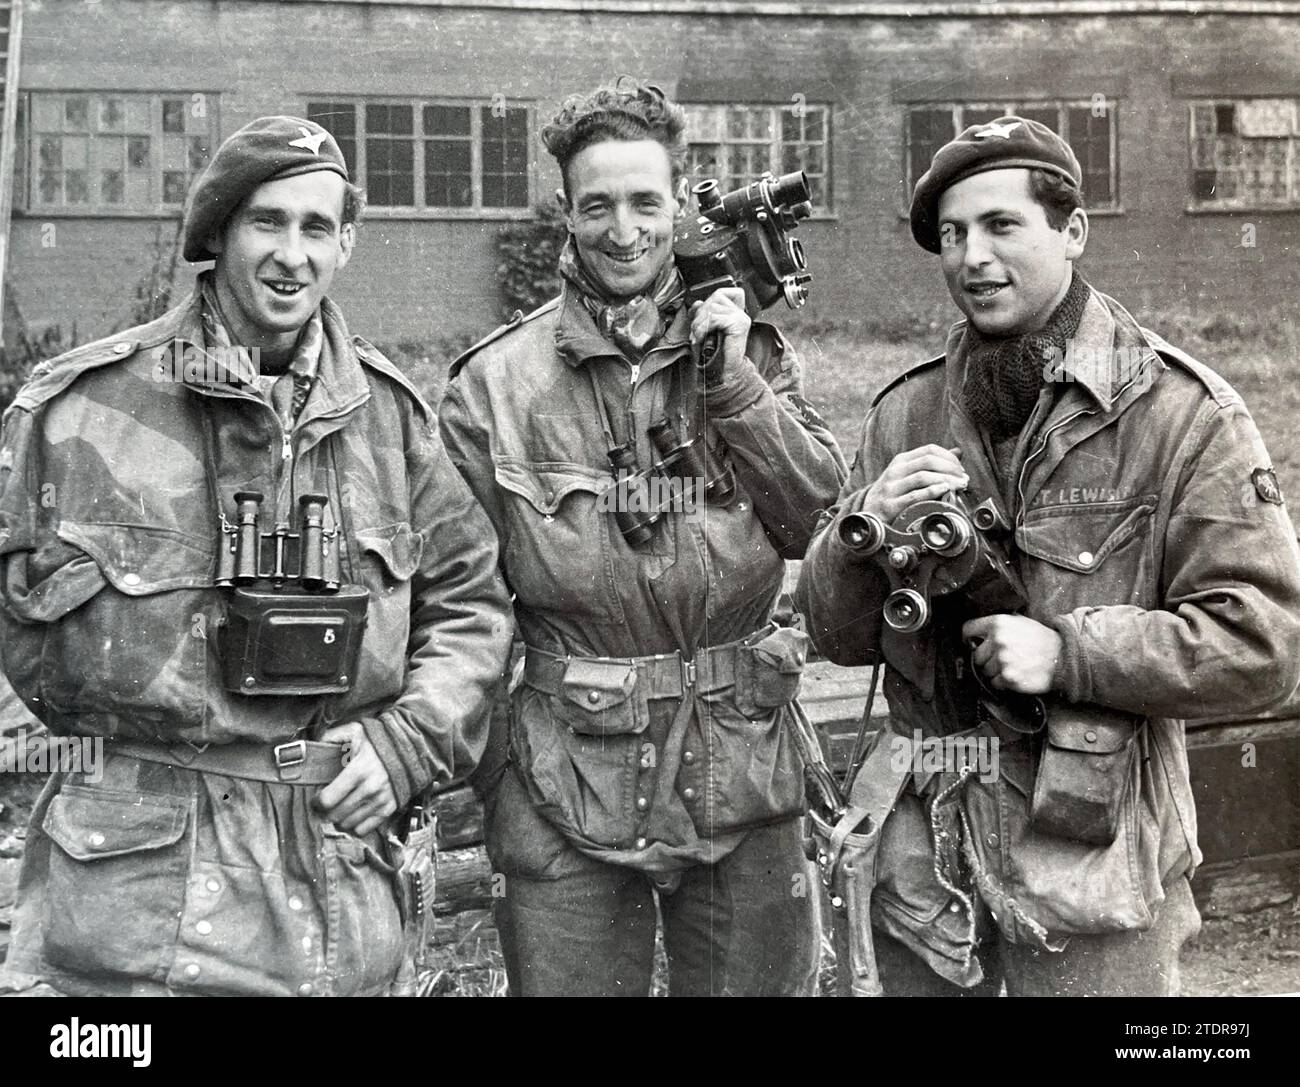 OPERATION MARKET GARDEN  September 1944. The operation was covered by three members of the Army Film and Photographic Unit  seen here back at AFPU HQ at Pinewood Studios on 28 September.  From left: Sgts  D.M.Smith, G. Walker, C.M.Lewis. Stock Photo